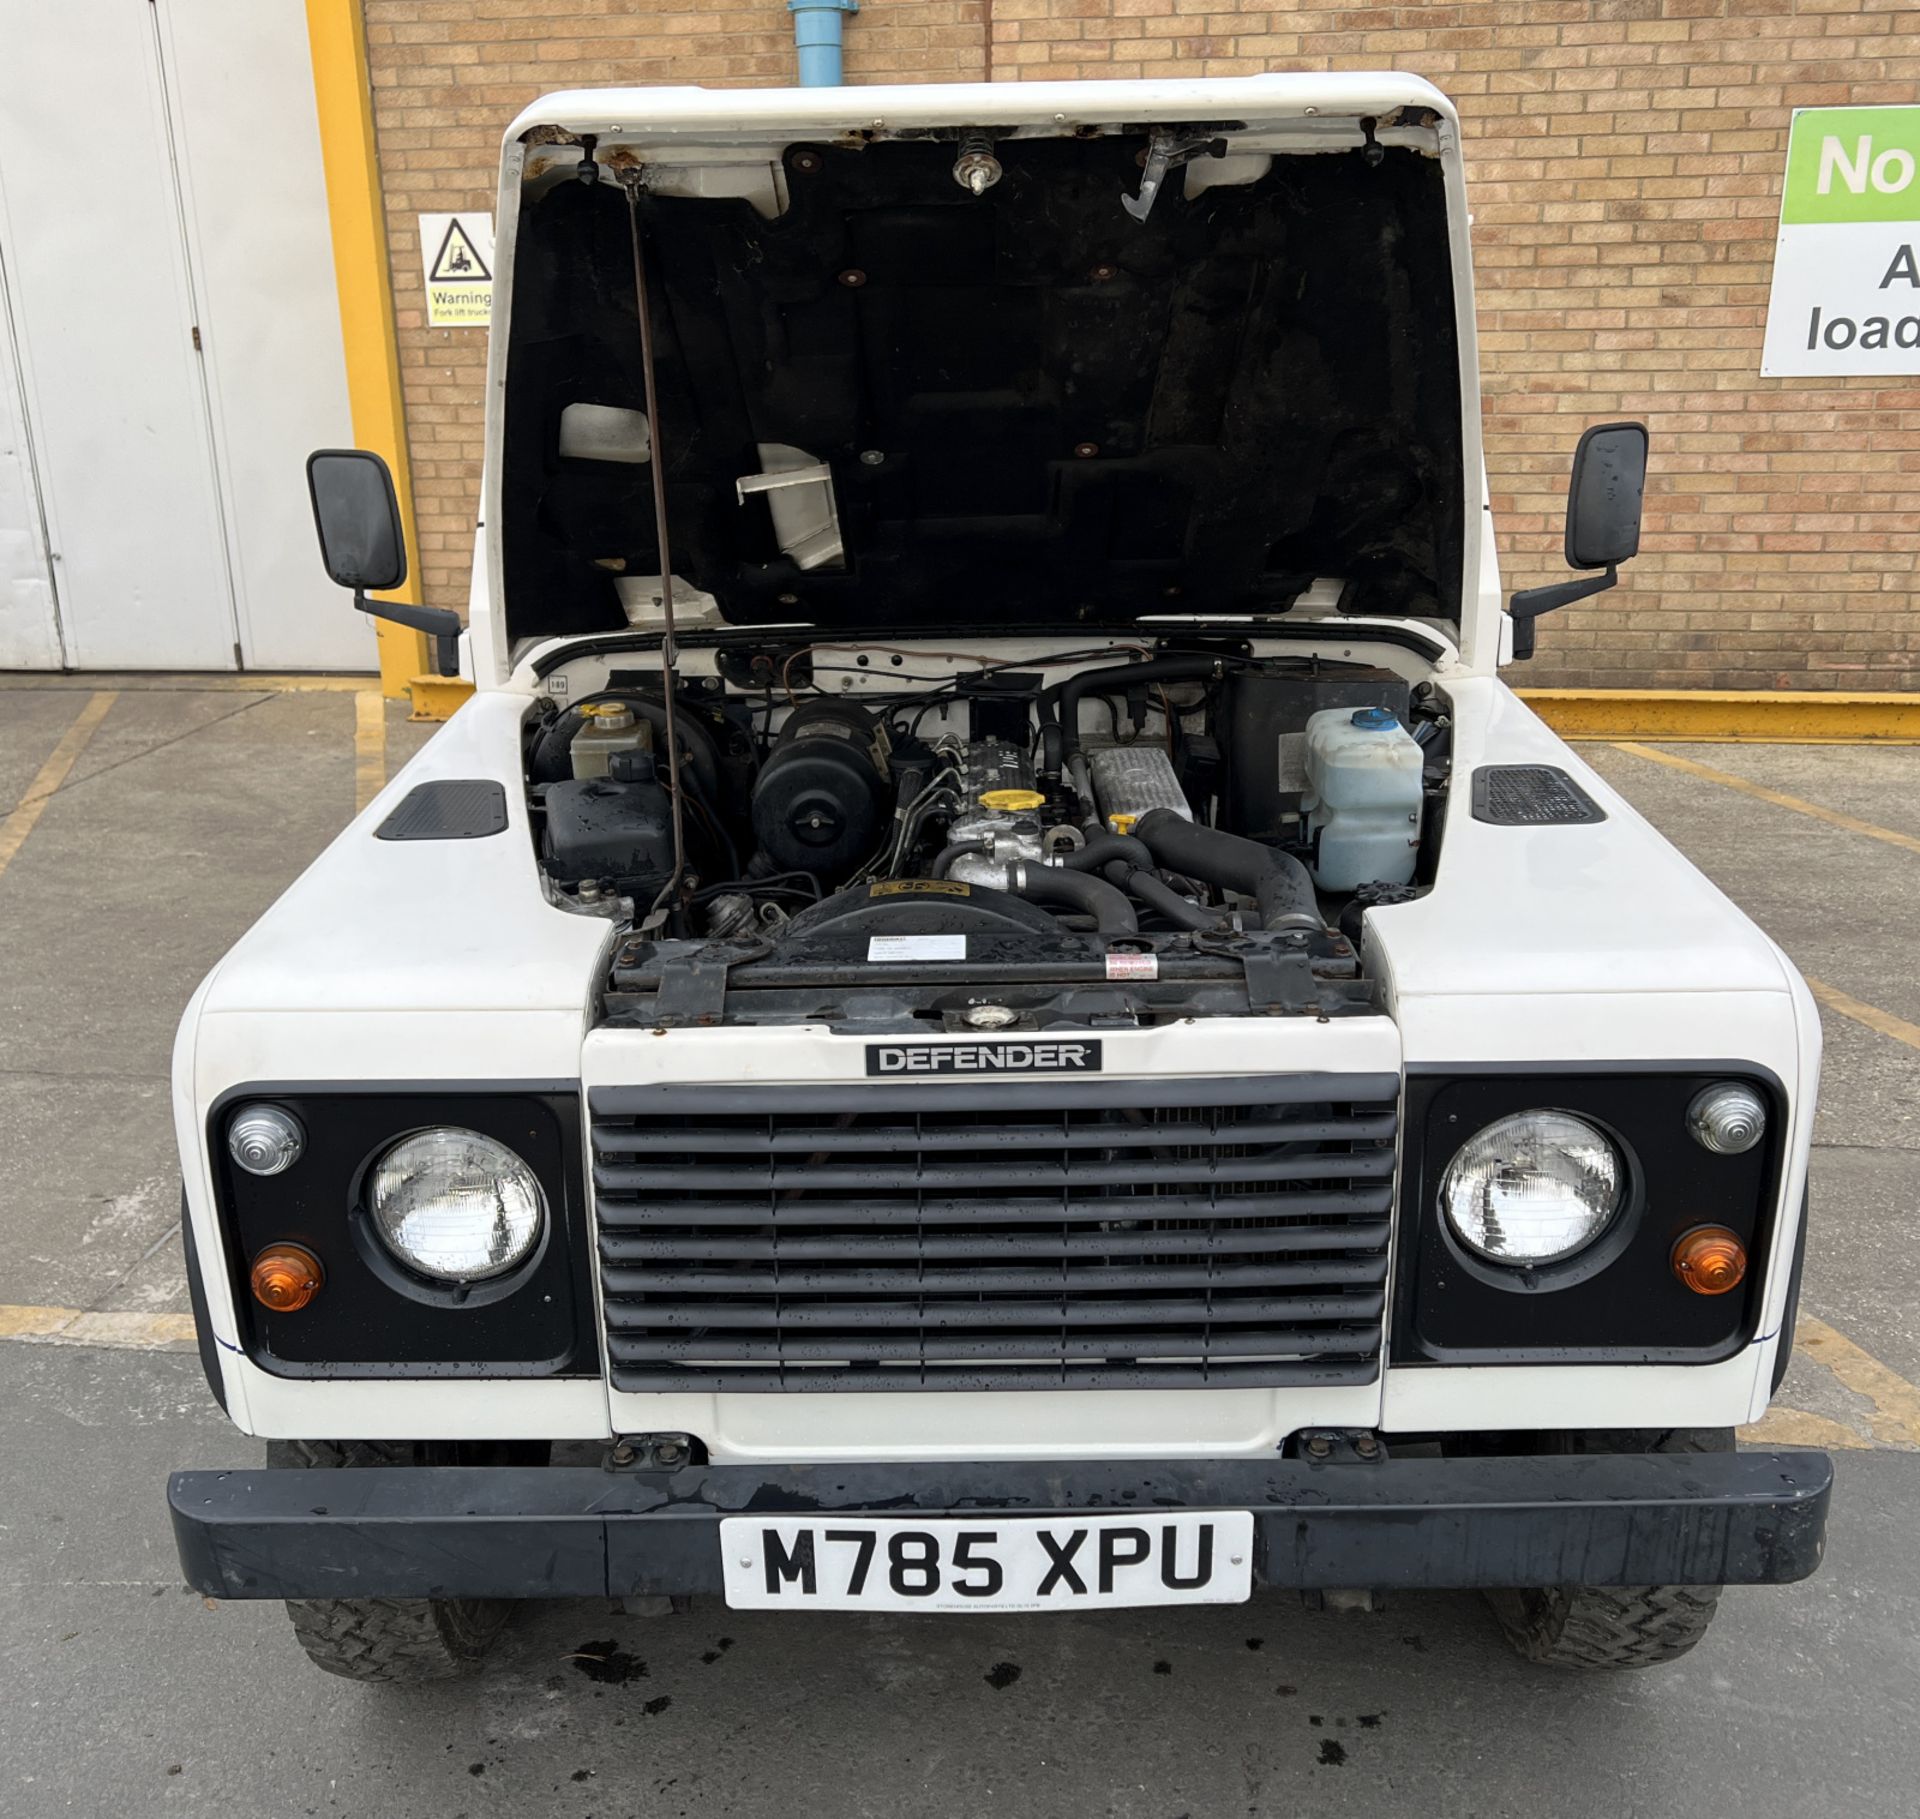 Land Rover Defender 110TDI - 1995 - Very low mileage at 24095 miles - 2.5L diesel - white - Image 41 of 49